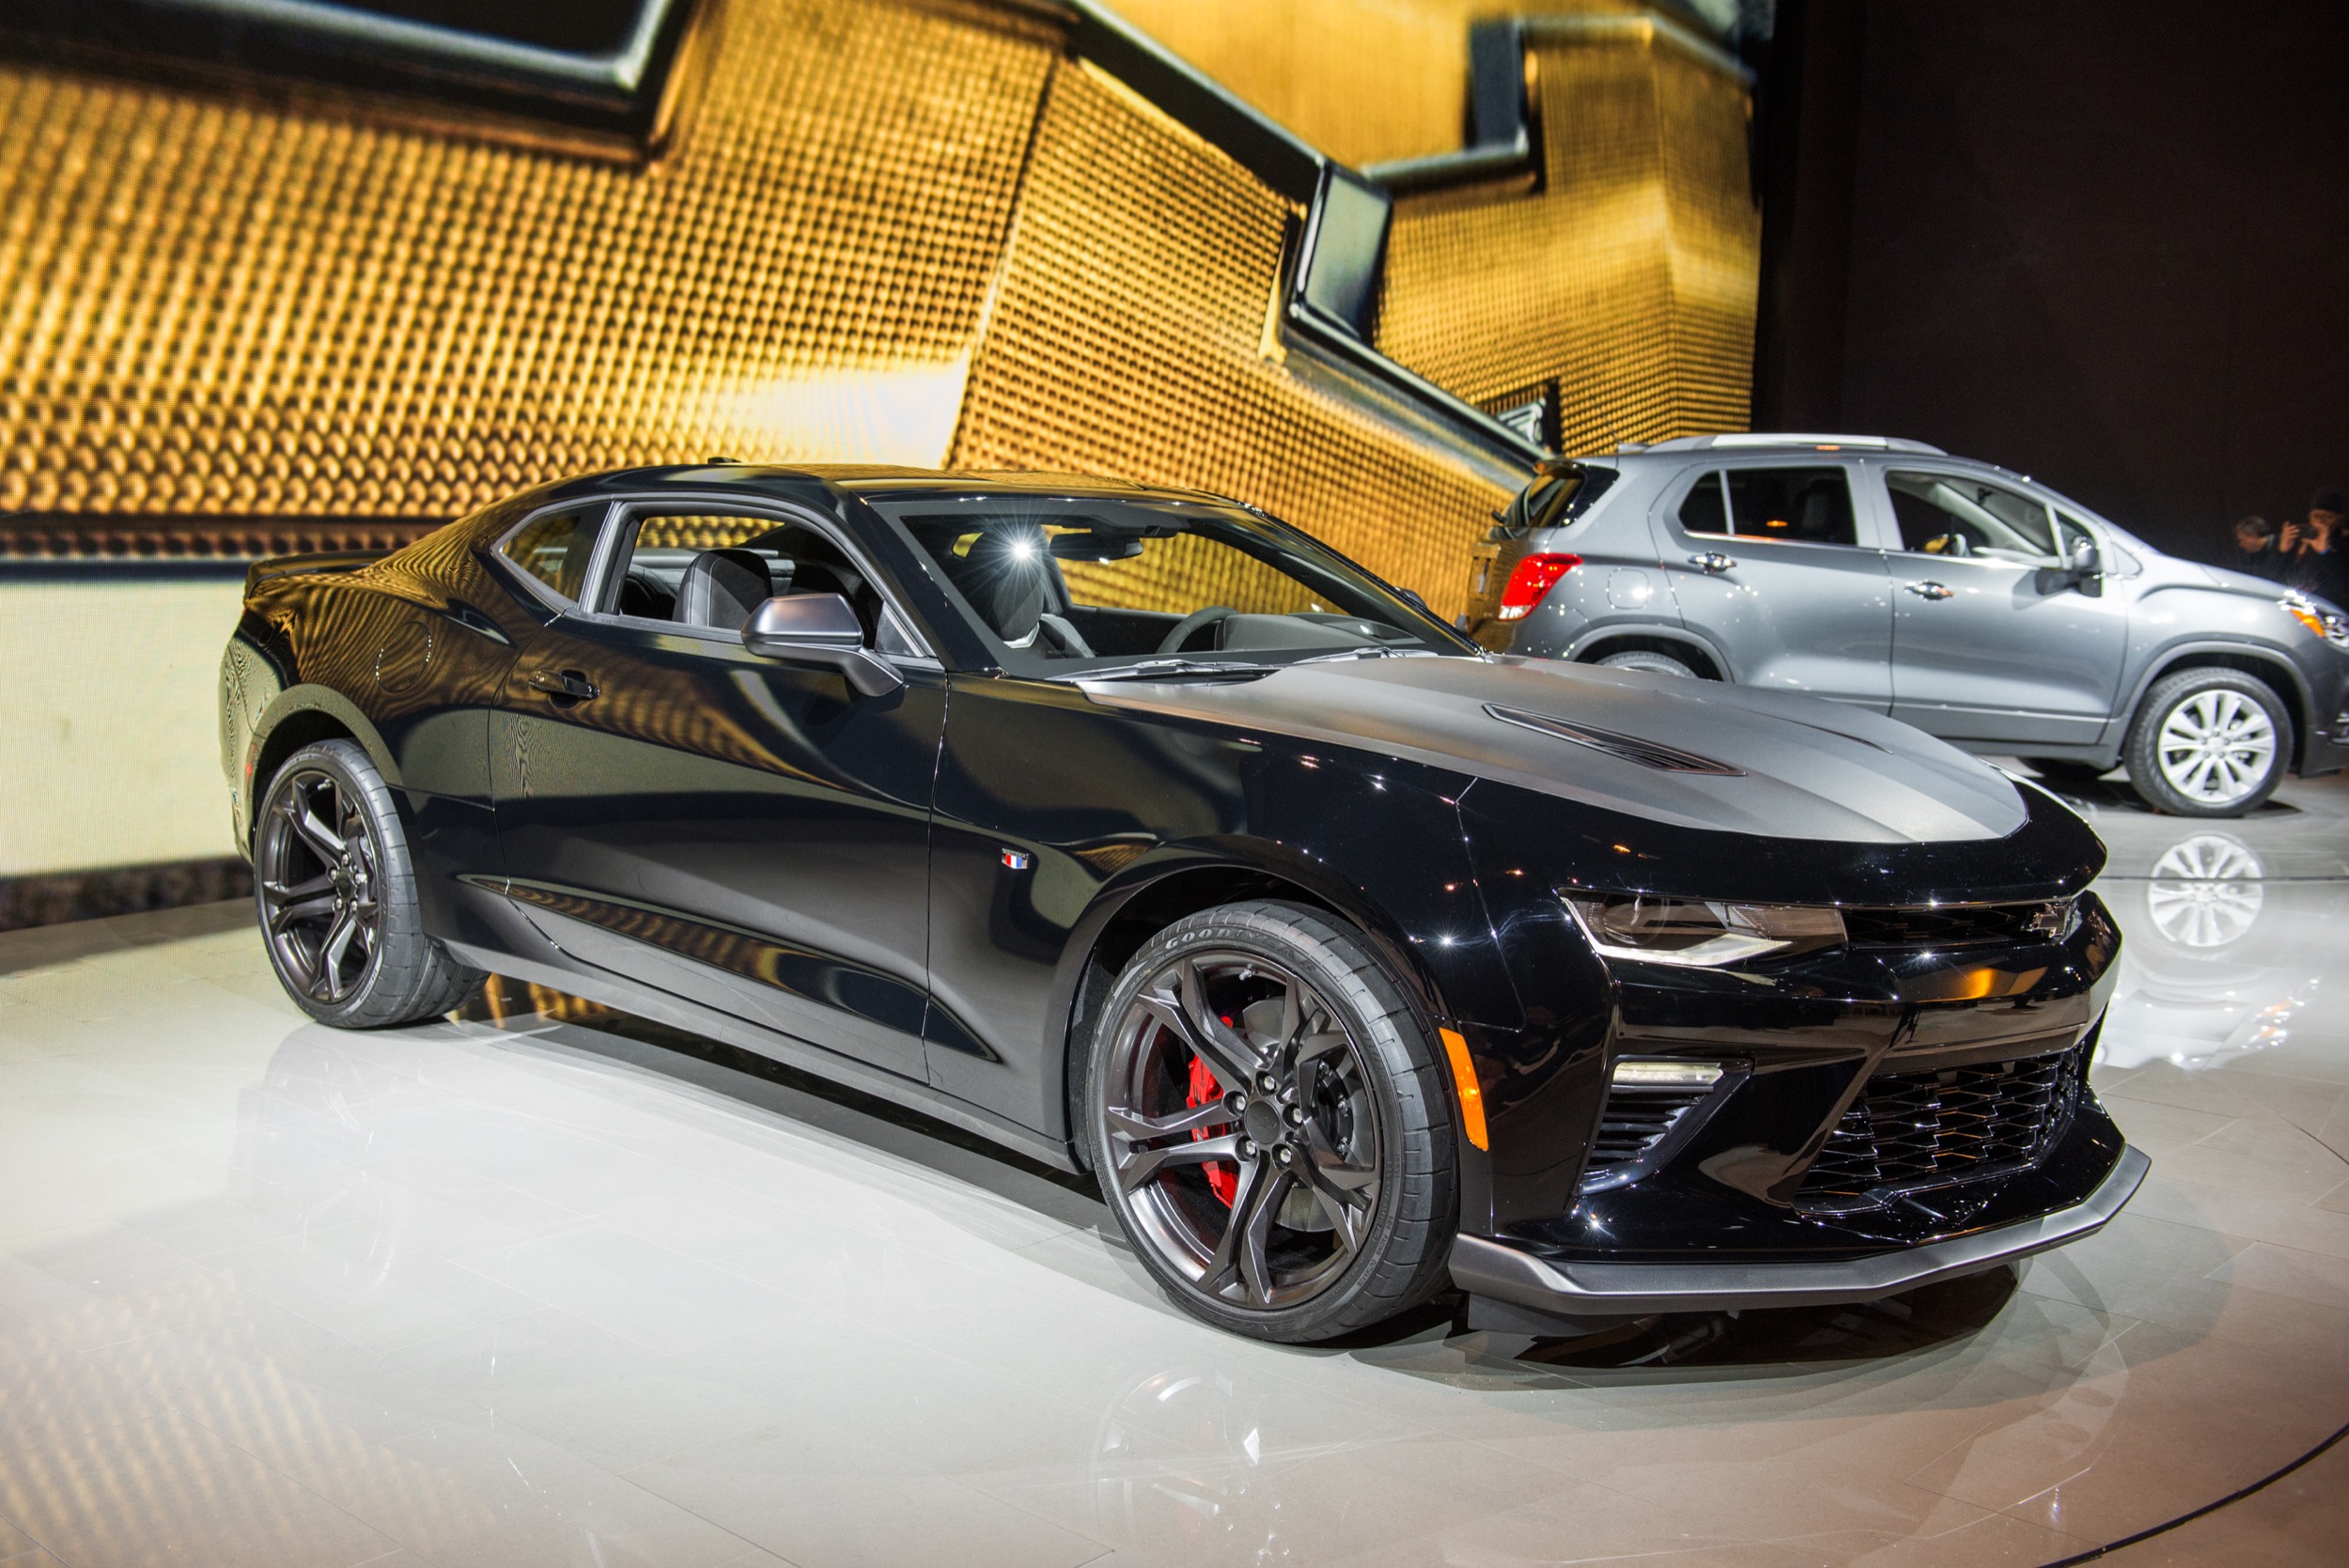 2017 Camaro 1LE Info, Power, Pictures, Specs, Wiki | GM Authority